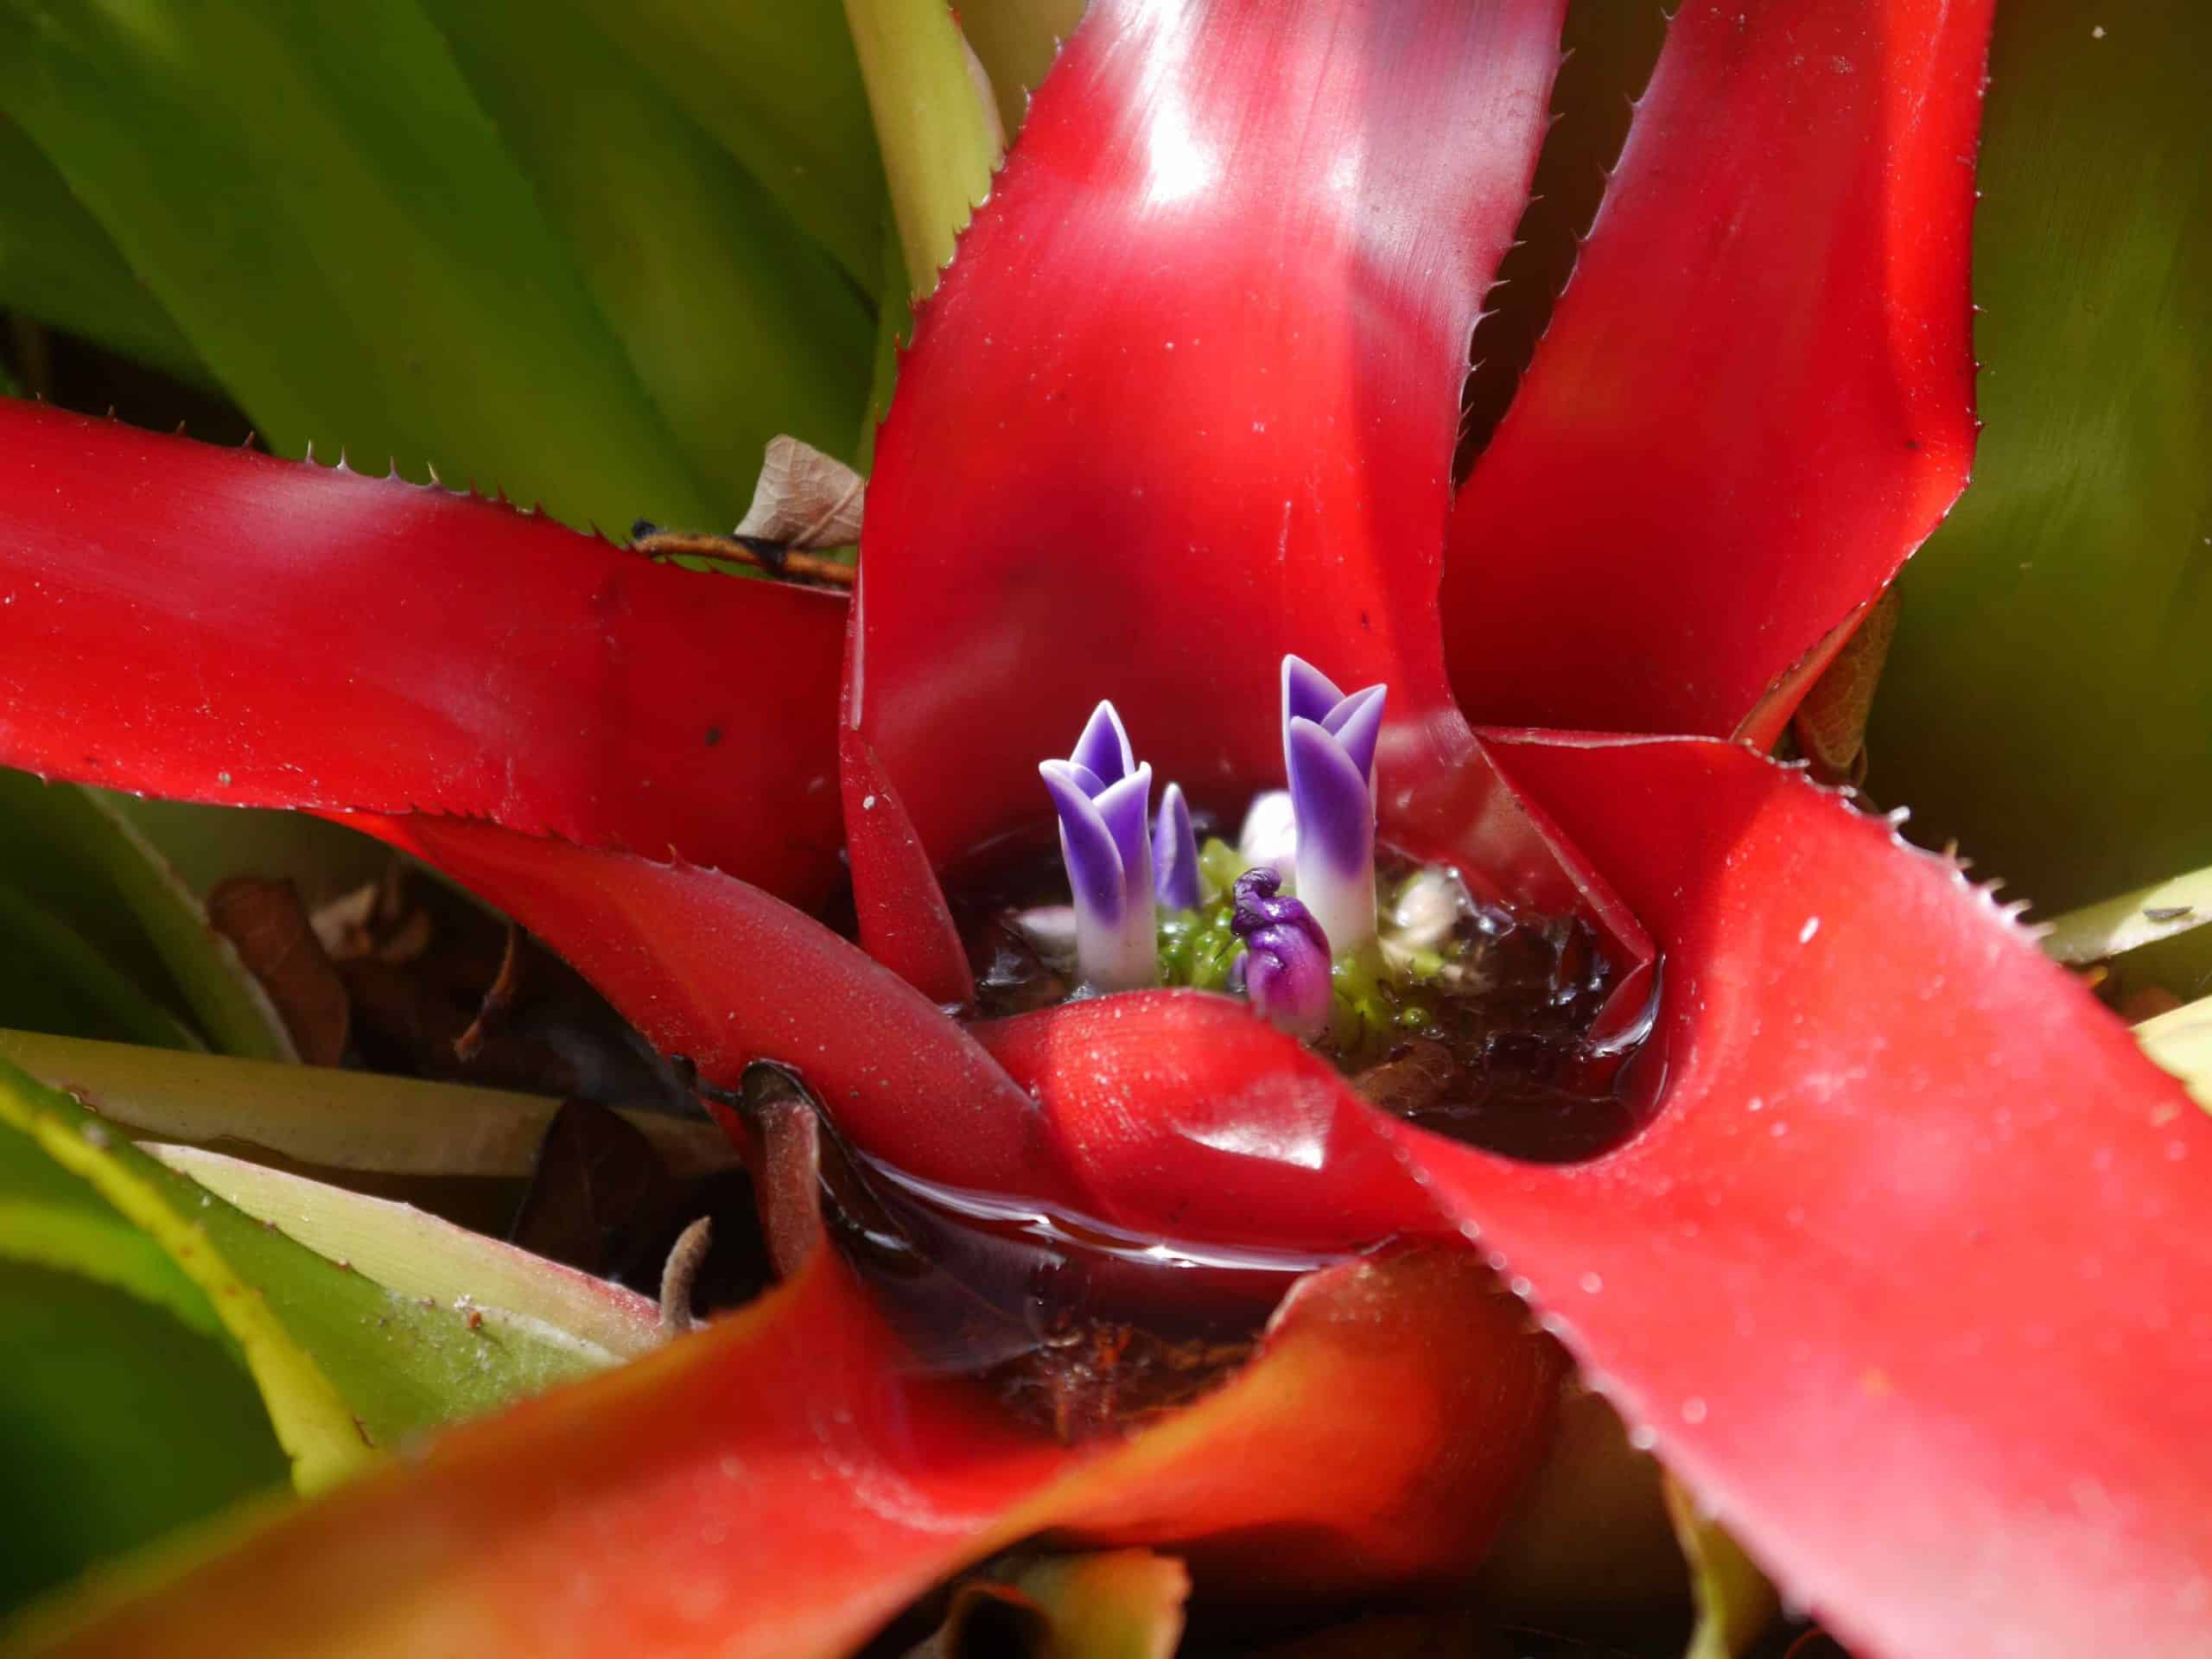 A close-up of a bromeliad with vibrant red leaves and small purple flowers centered in pooled water.